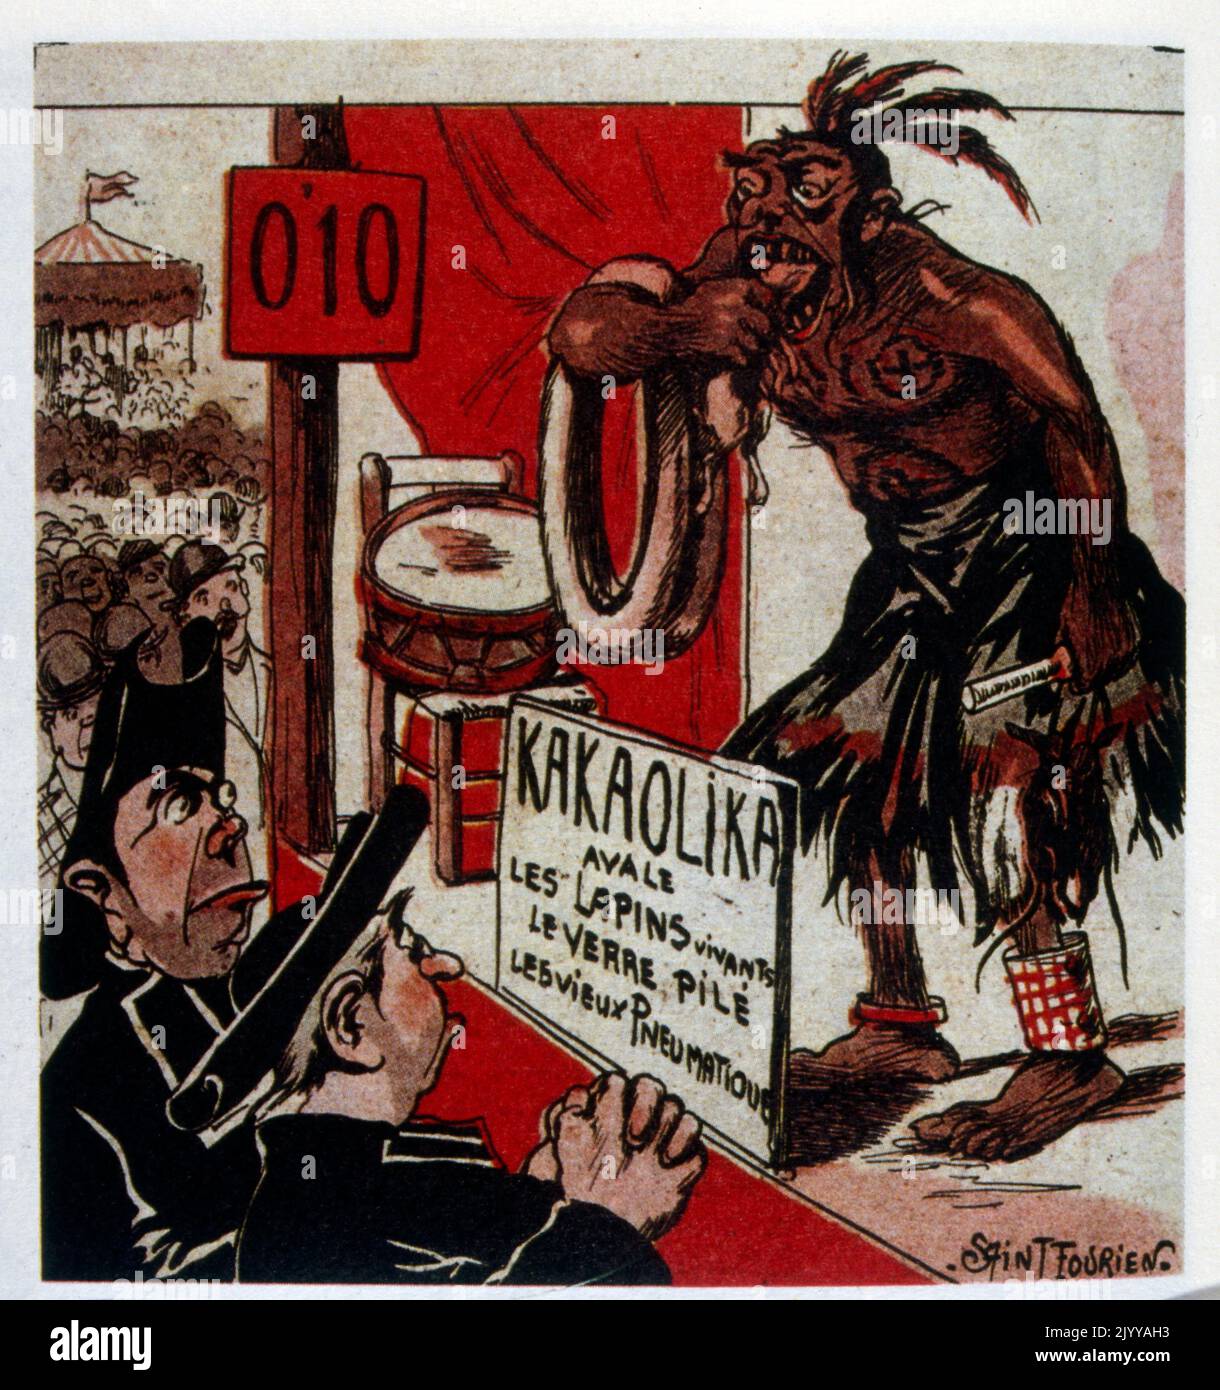 Coloured Illustration of a freak show with a character called Kakaolika on stage with a plaque in front saying that he swallows live rabbits, glasses and tyres. Illustrated by Spint Foorien. Stock Photo